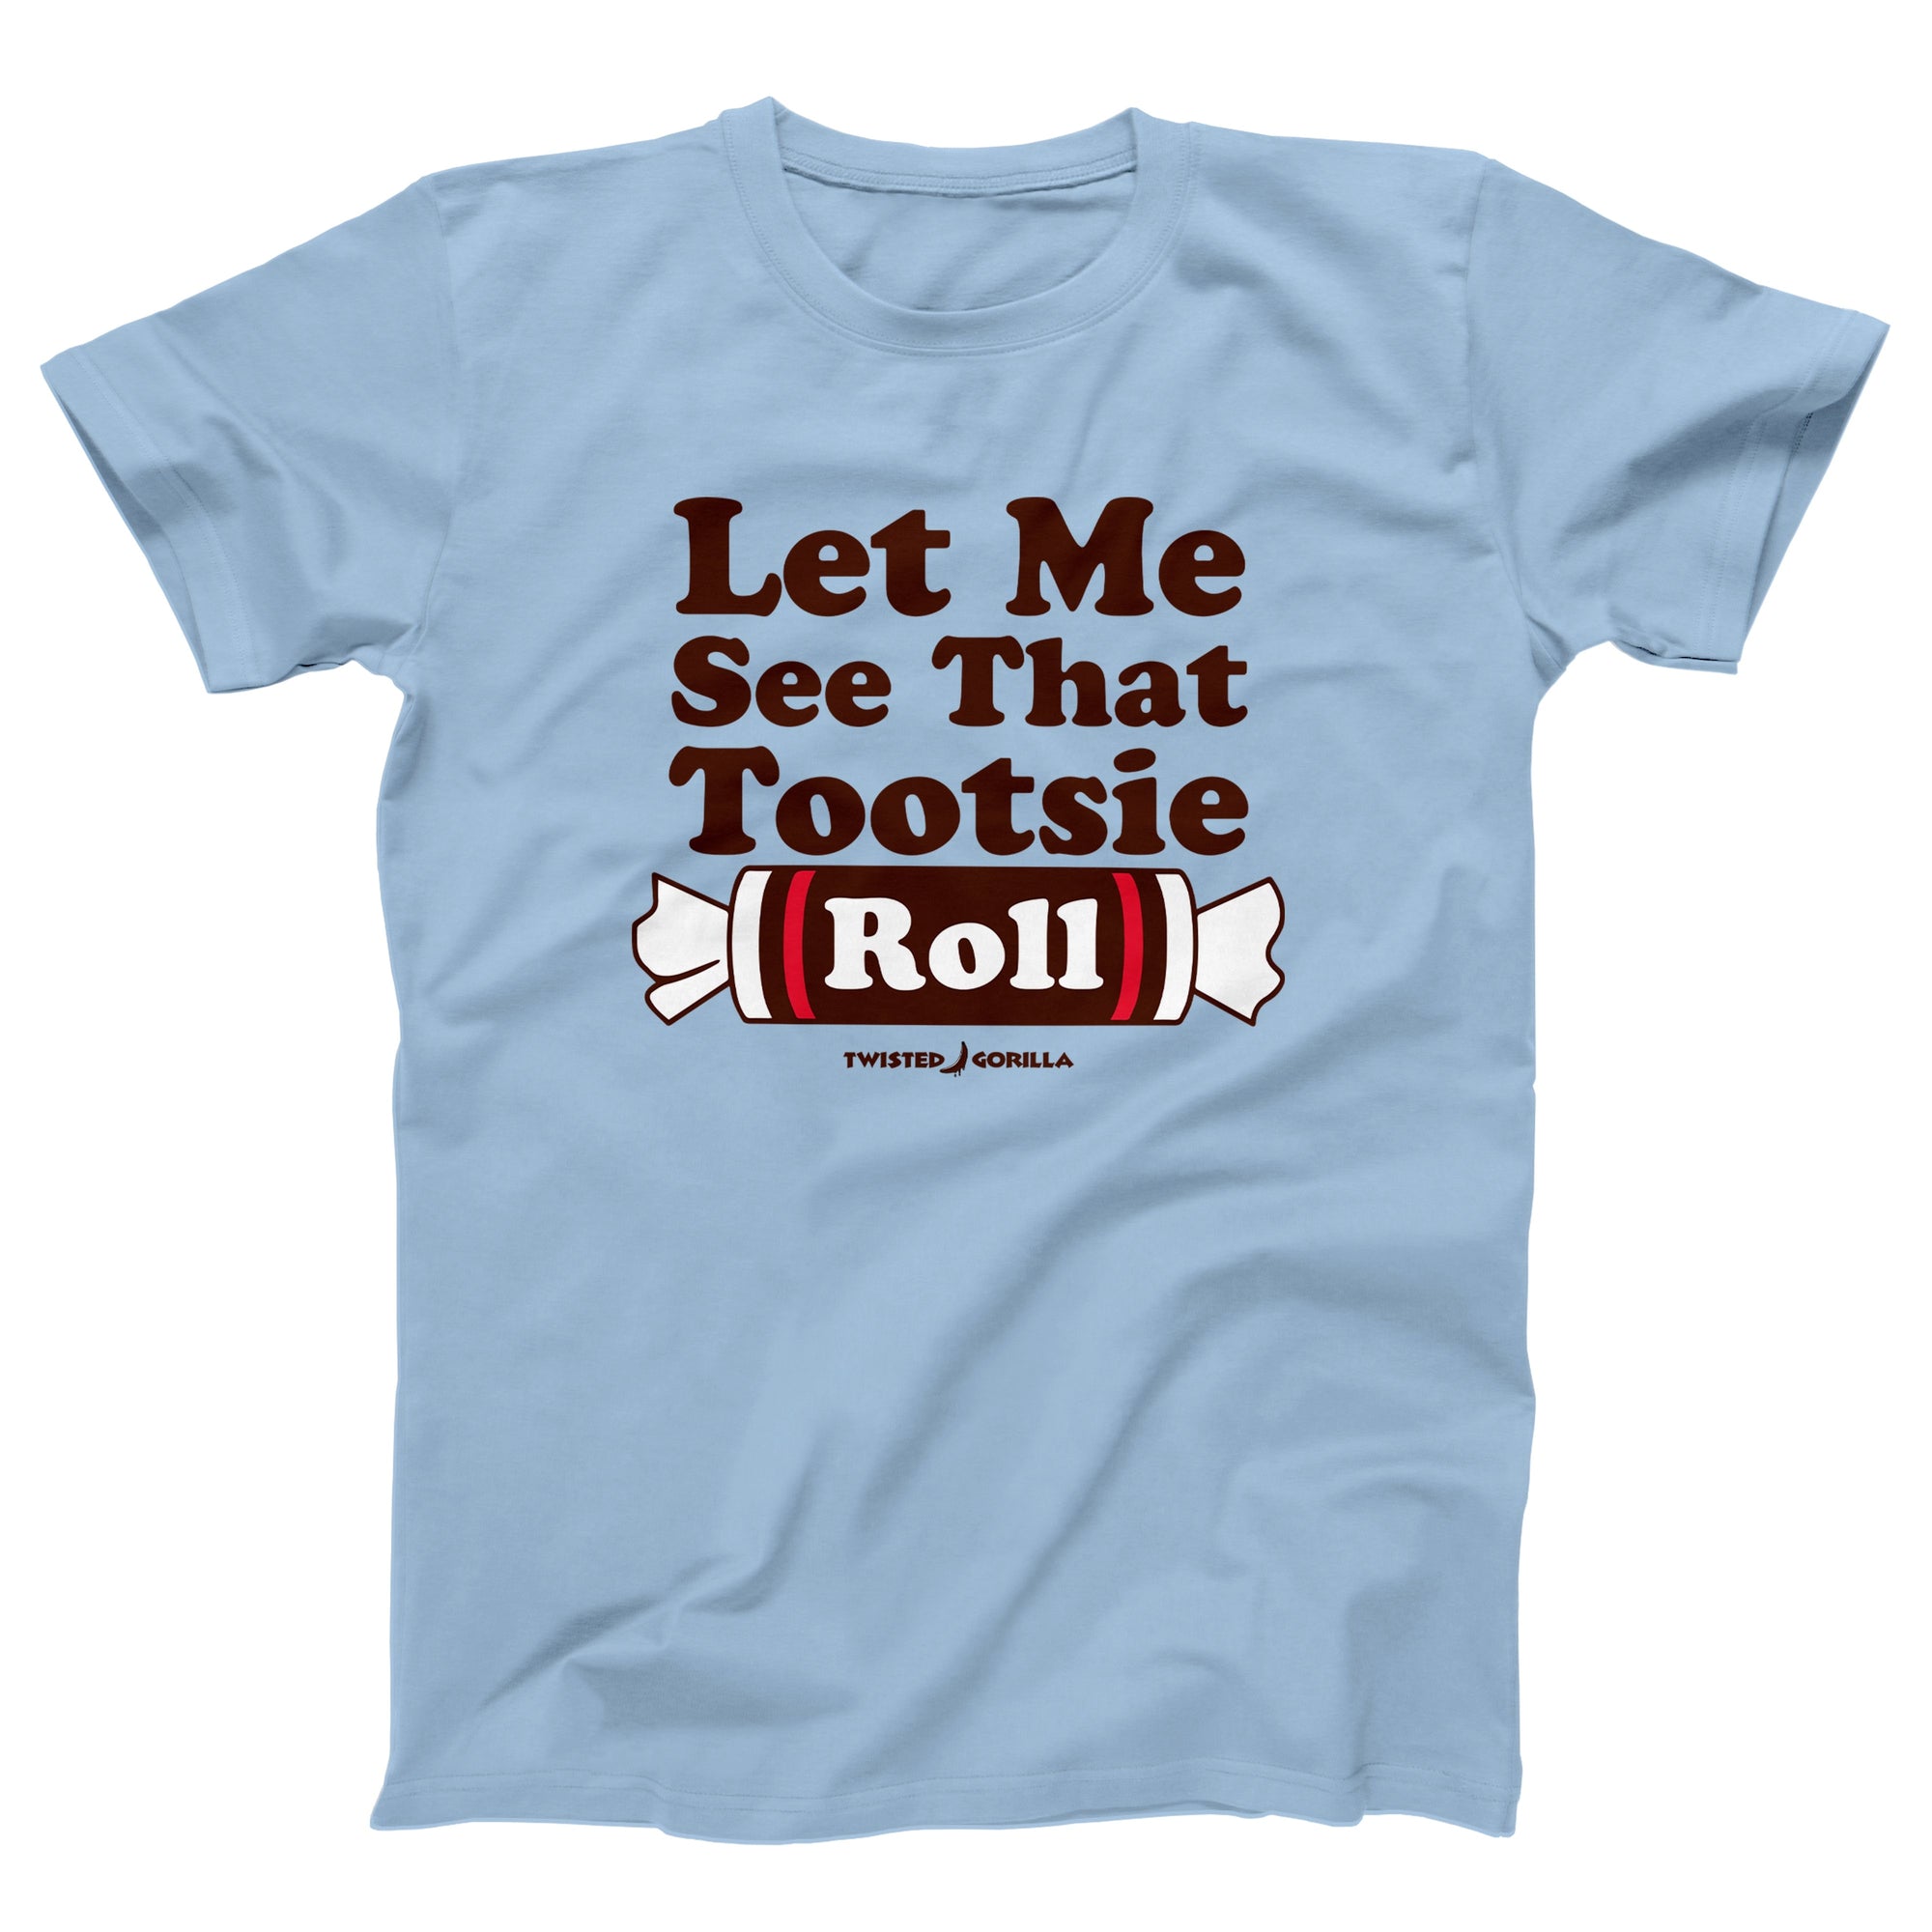 Let Me See That Tootsie Roll Adult Unisex T-Shirt - anishphilip